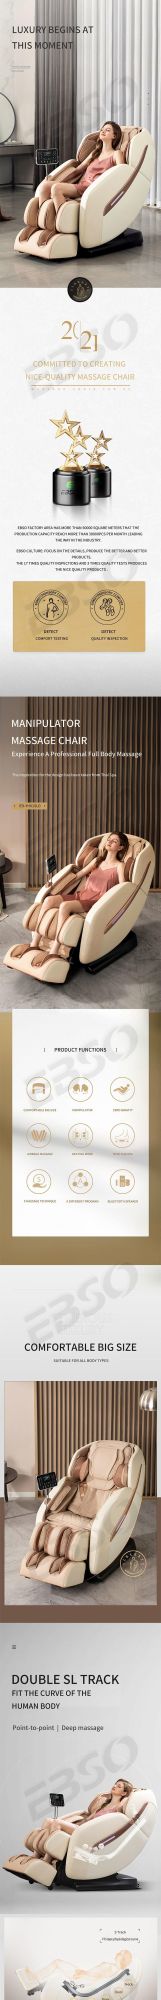 Hot Compress Function Knead Scraping All Small Cheap Massage Chair Full Body Zero Gravity Luxury New Model with SL Track